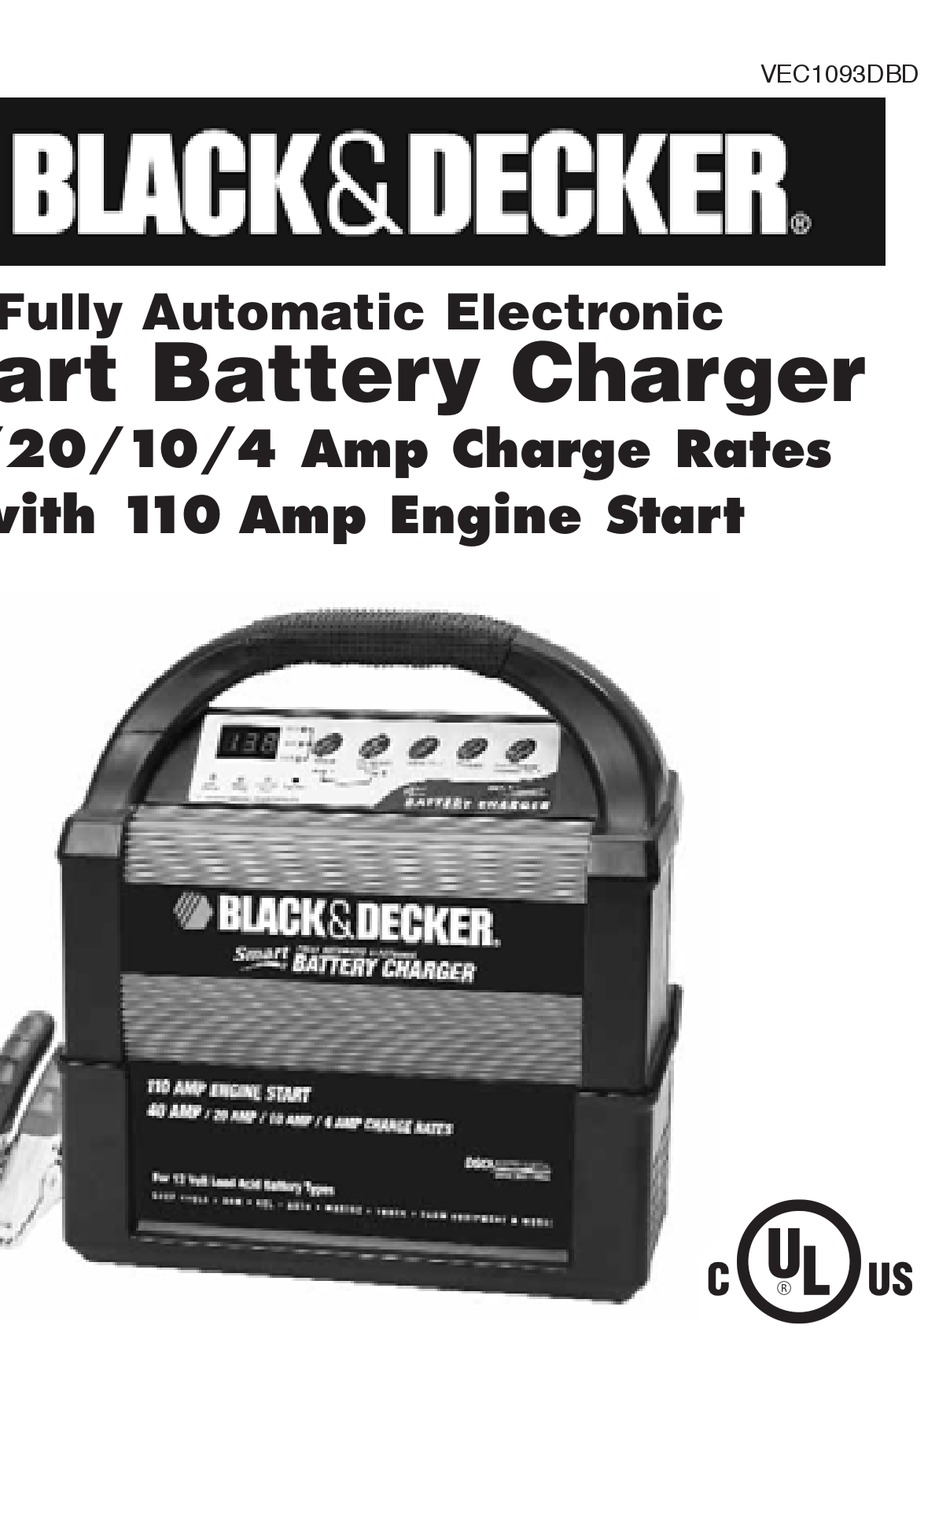 Controls And Indicators - Black & Decker Smart Battery Charger User Manual  [Page 4] | ManualsLib